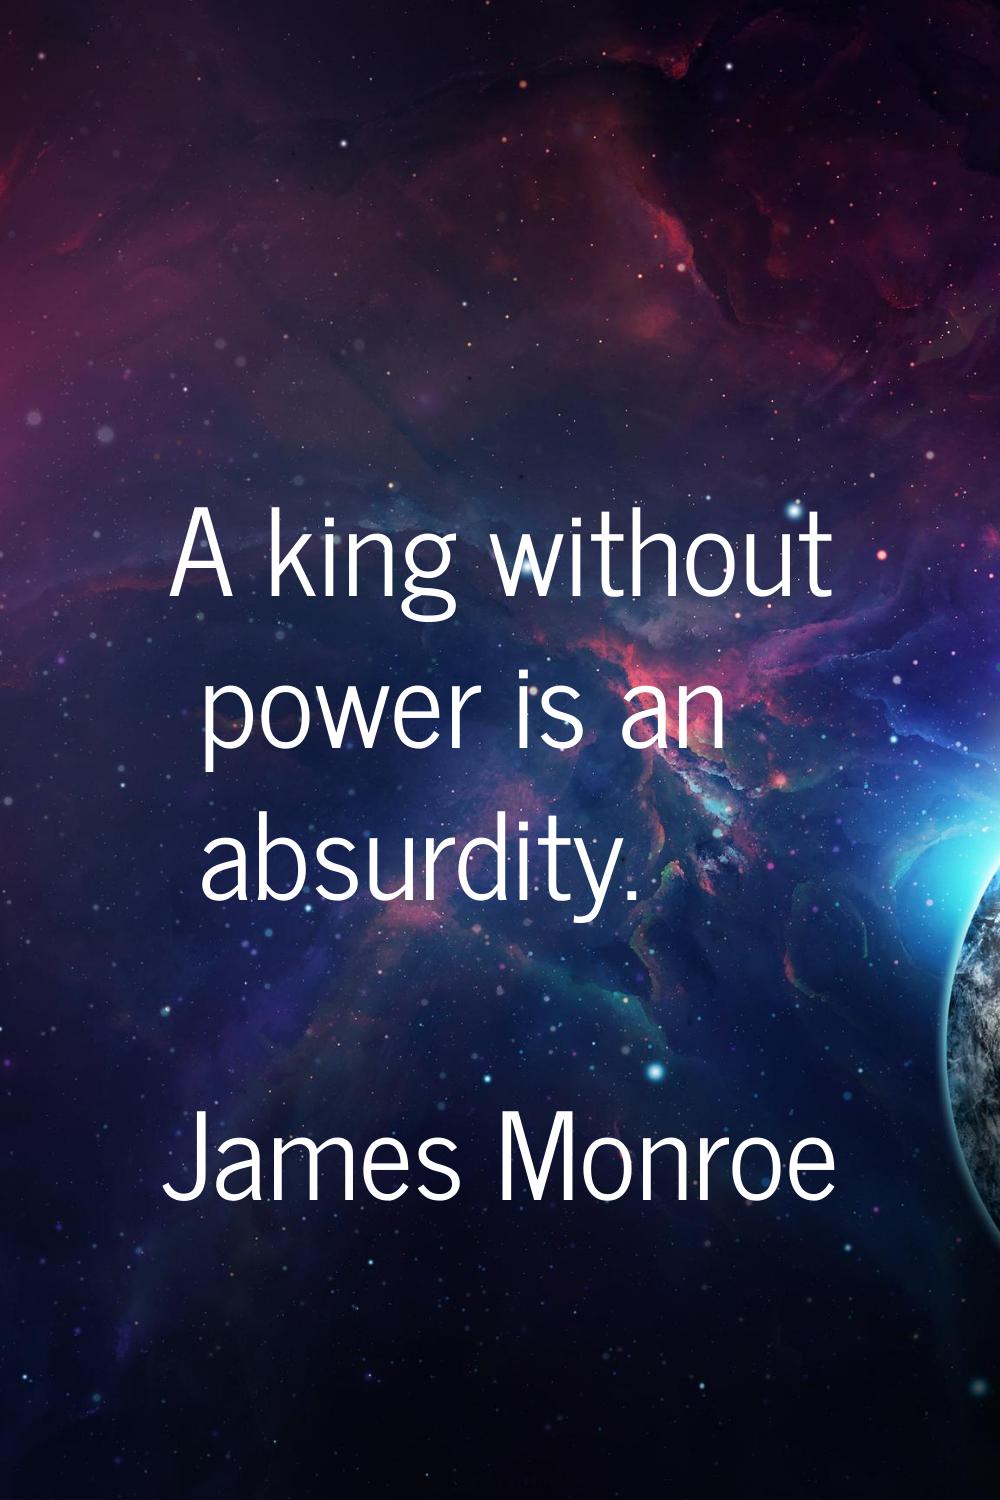 A king without power is an absurdity.